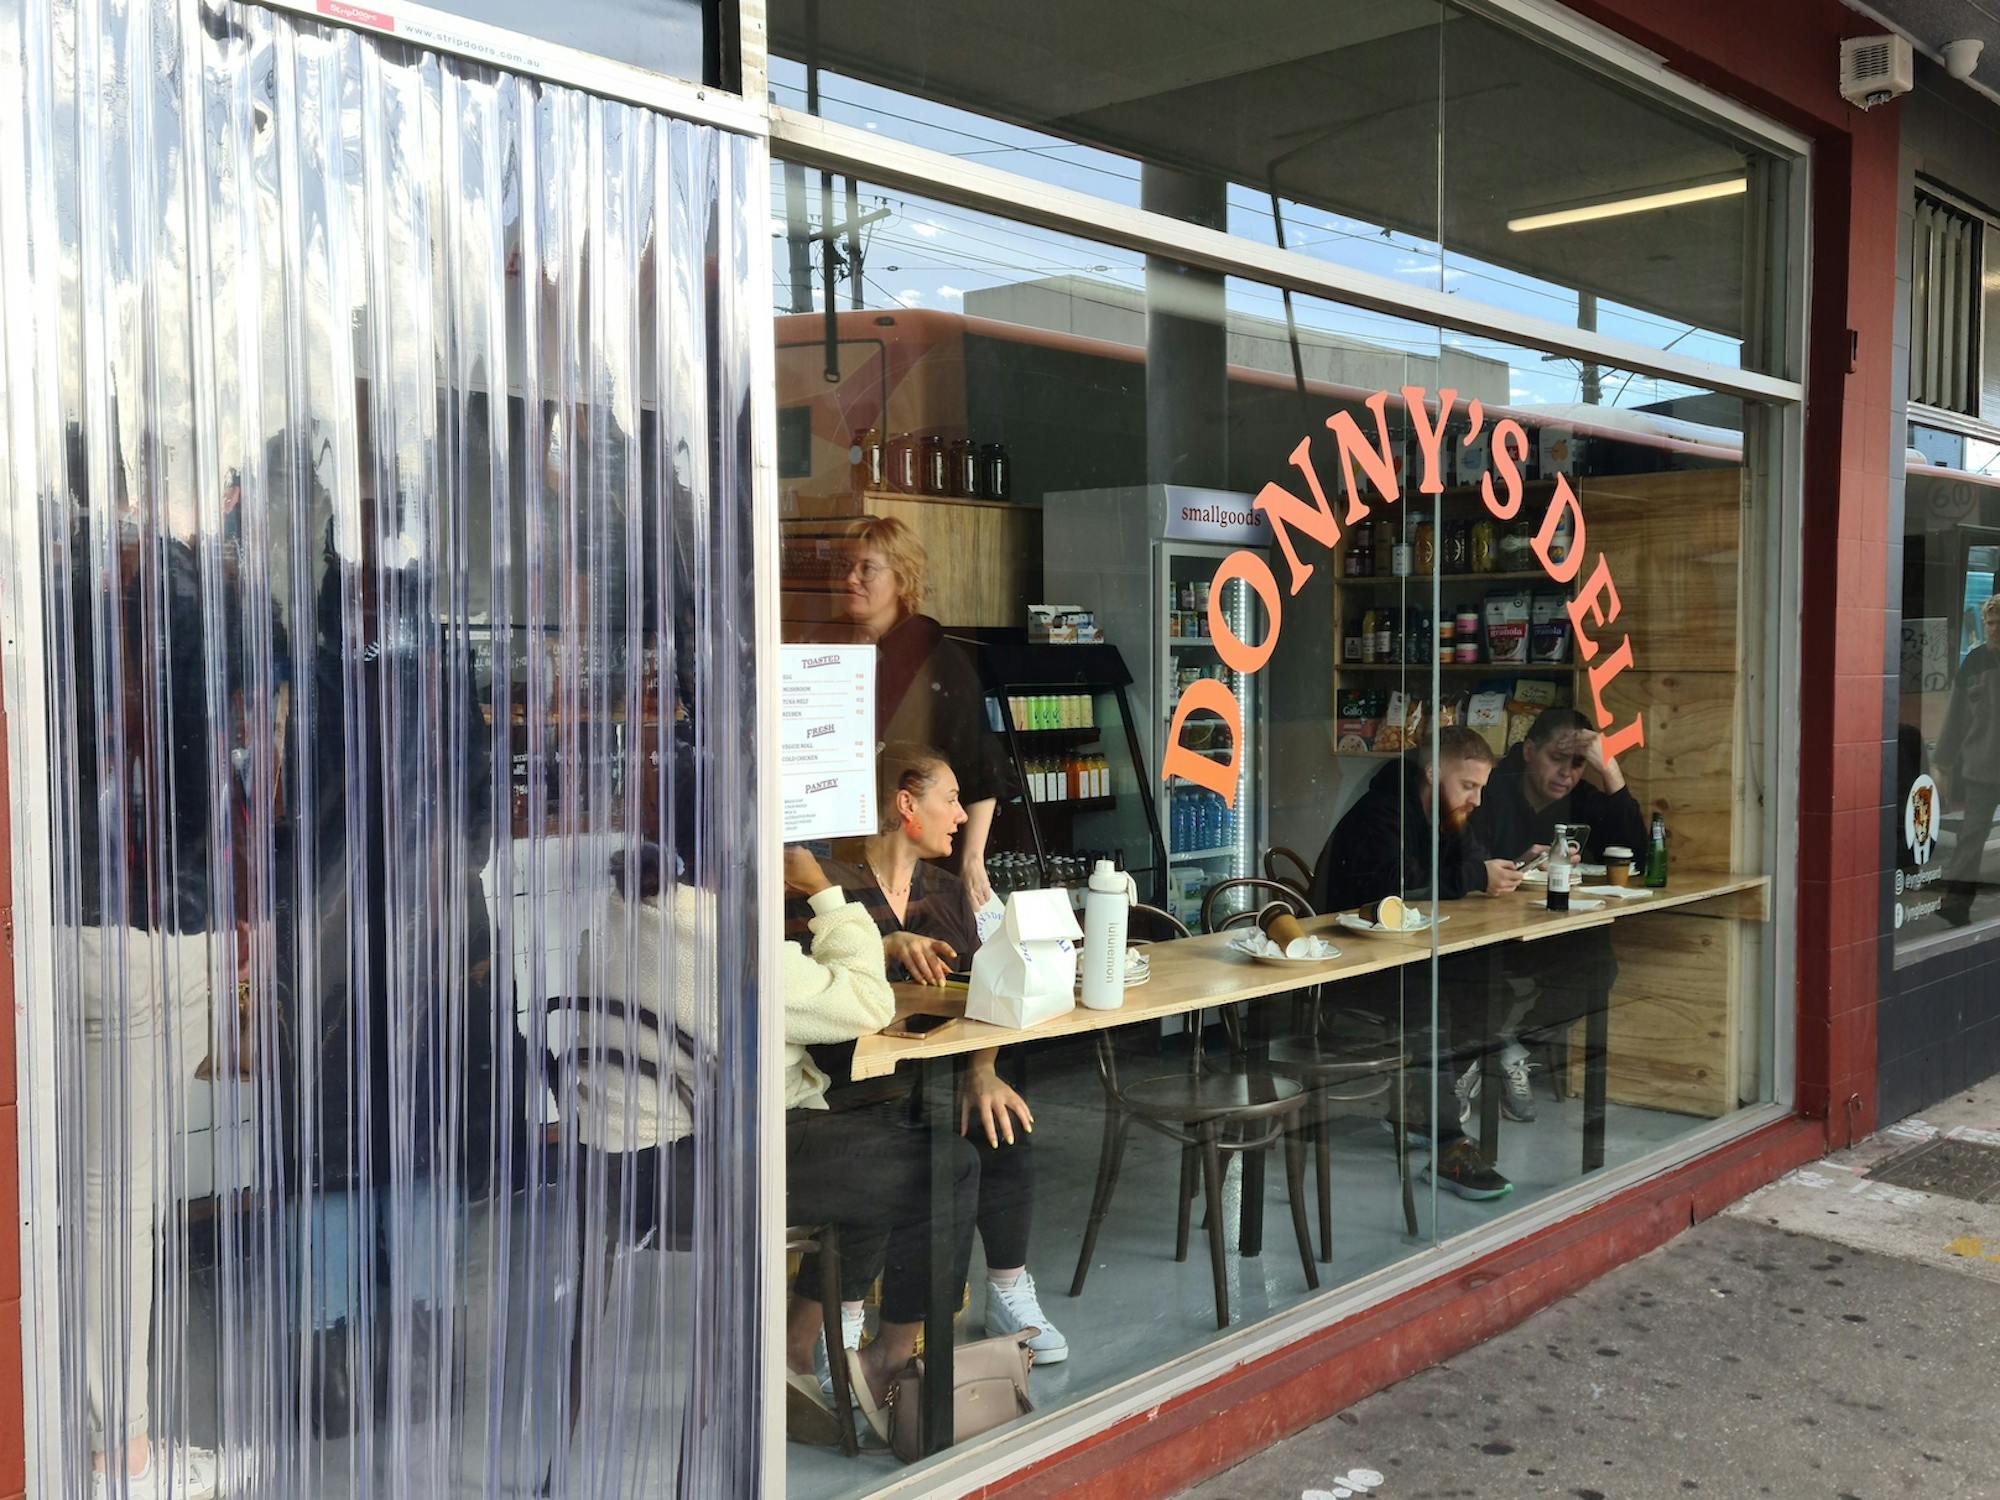 People sitting at bench facing a large floor to ceiling window at the front Donny's Deli. The window has a decal with the business' name on it.